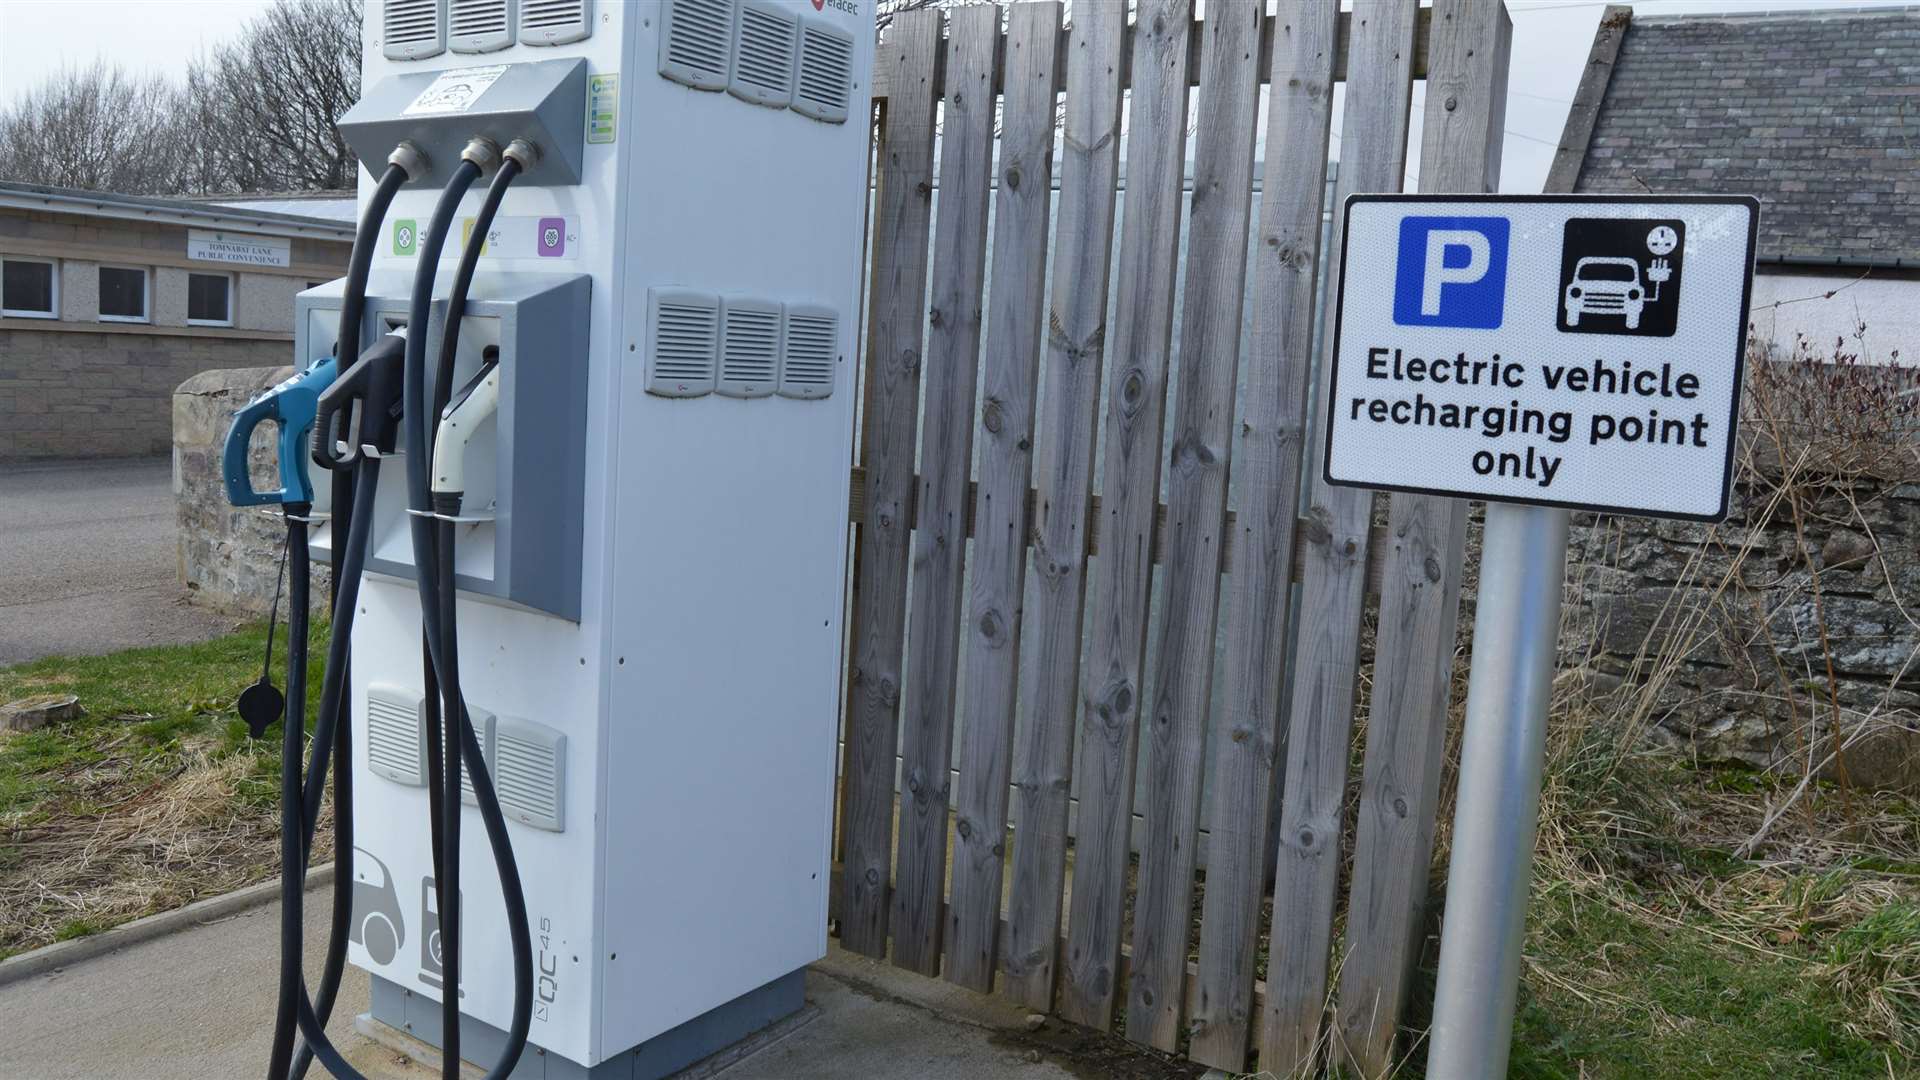 Moray Council operates several electric vehicle charging points throughout the area.